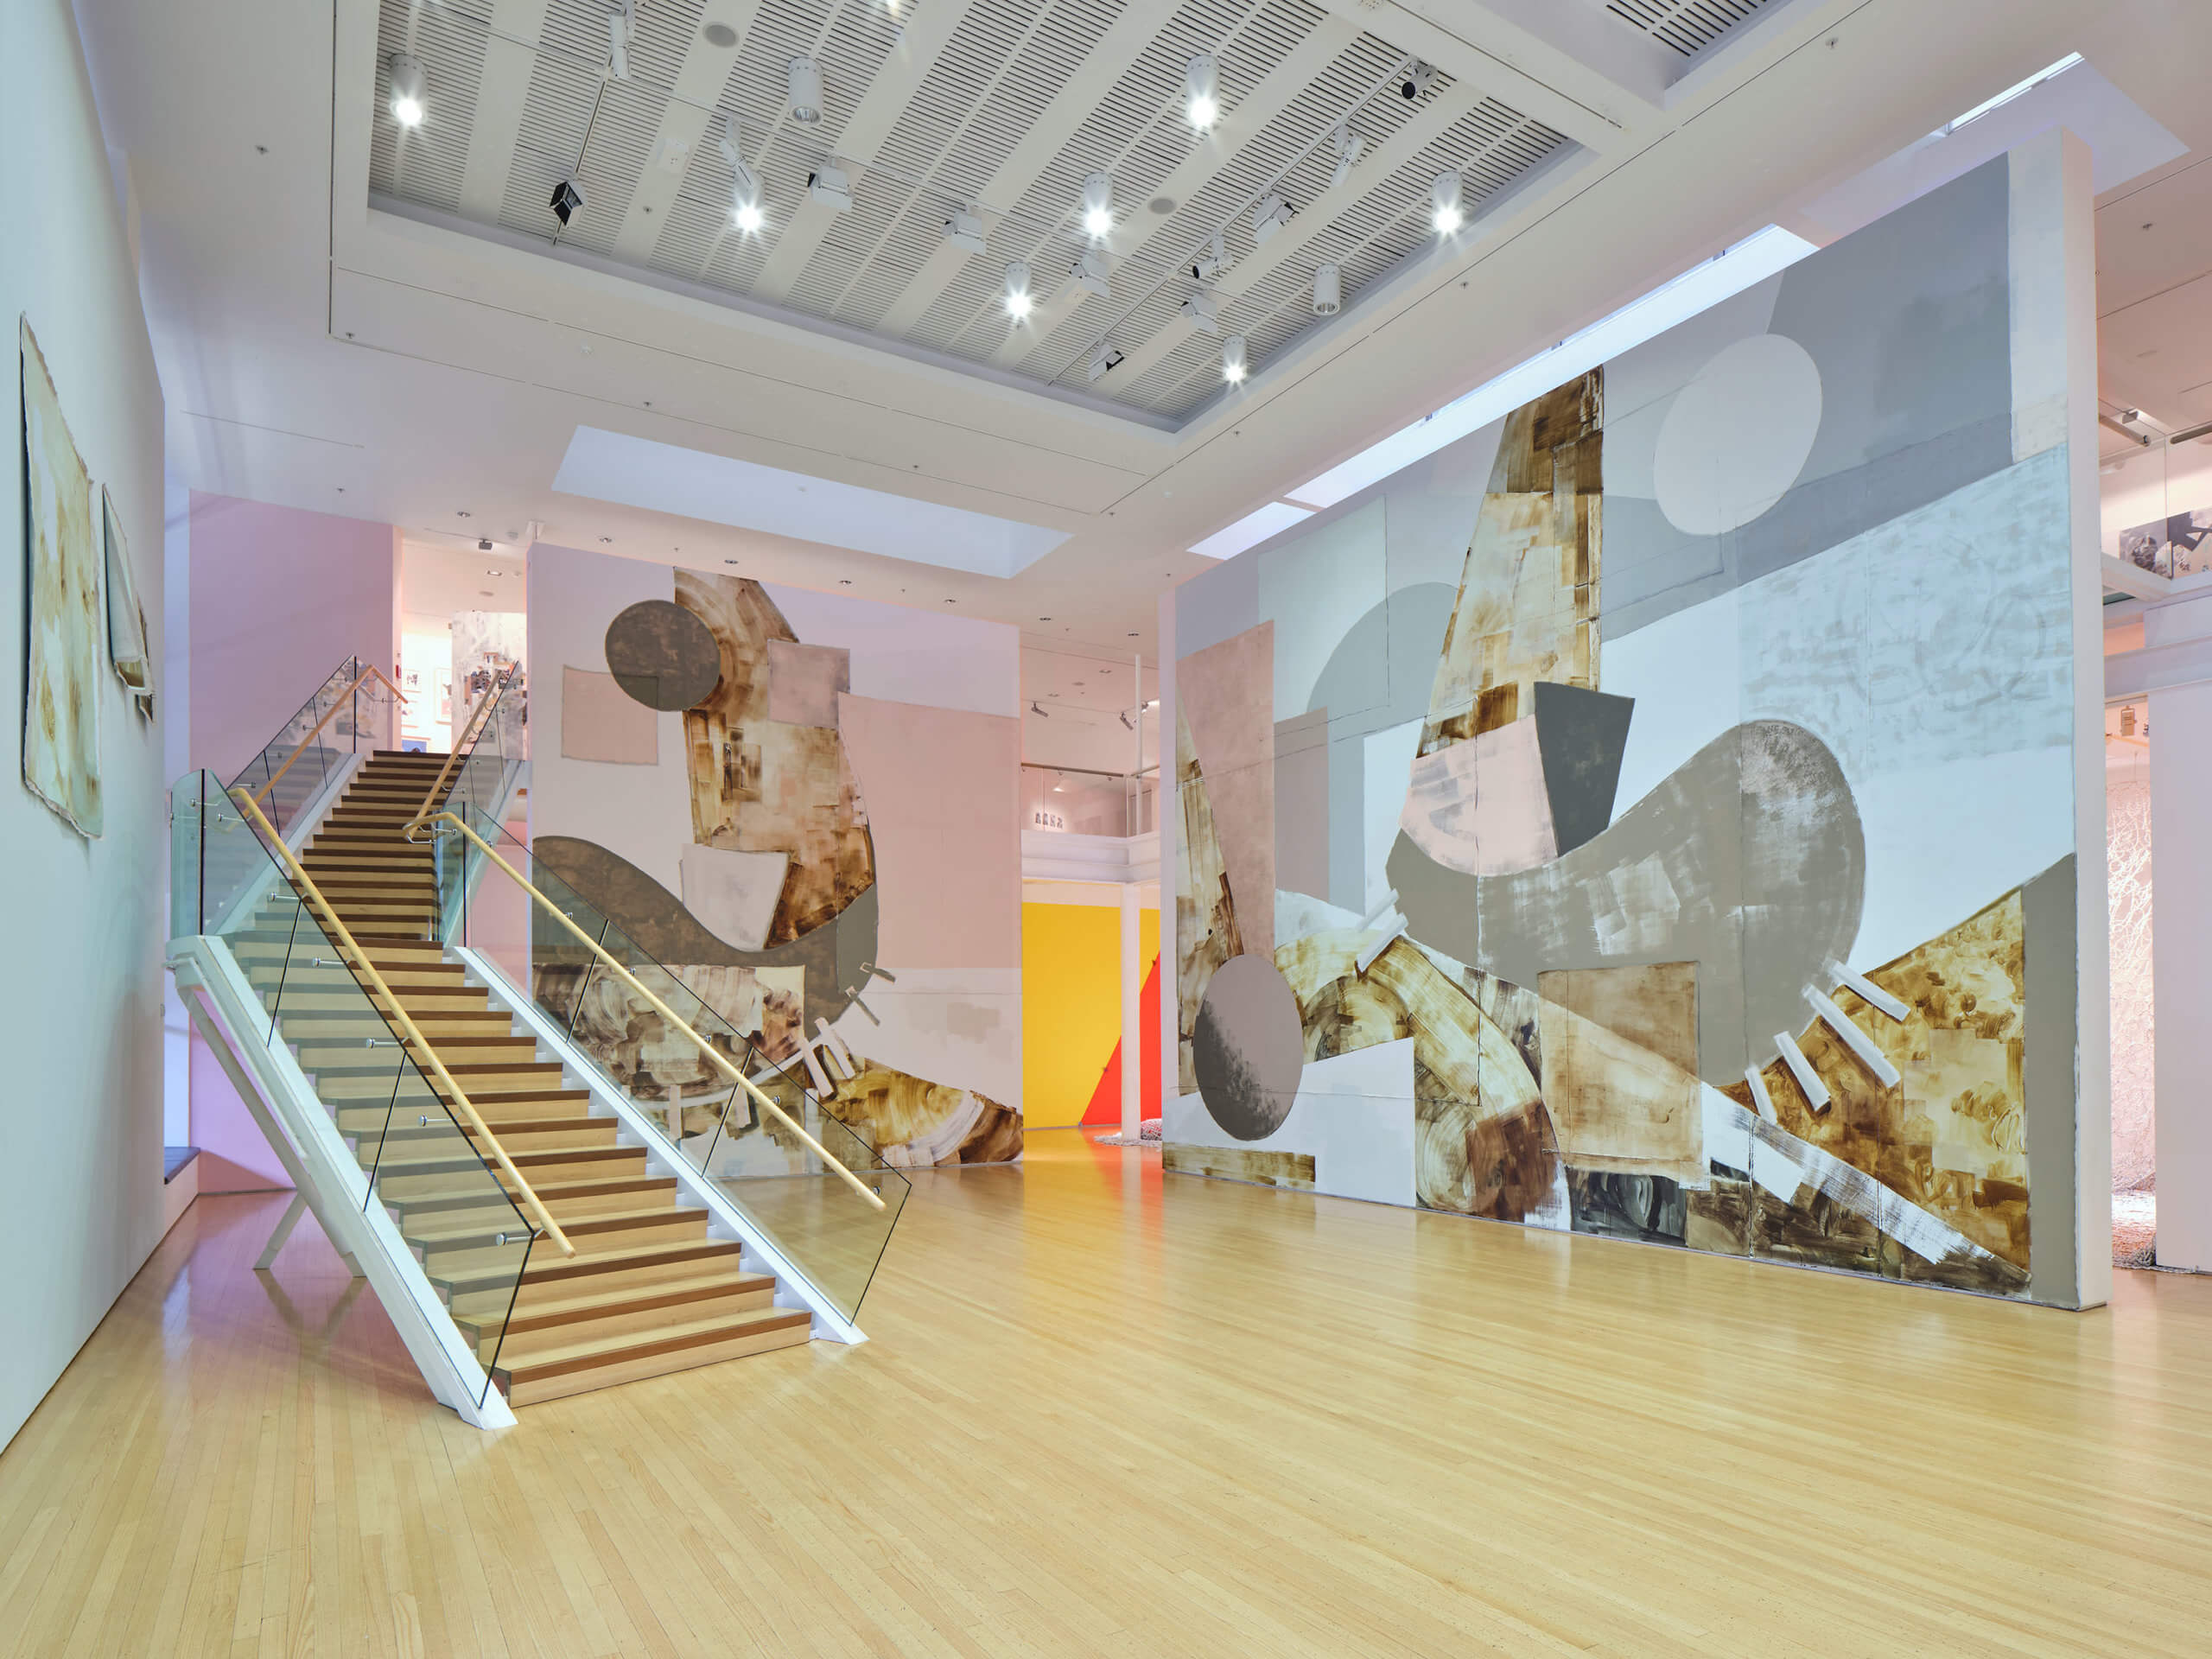 A view of Tauranga Art Gallery - staircase and large walls with painted installation.